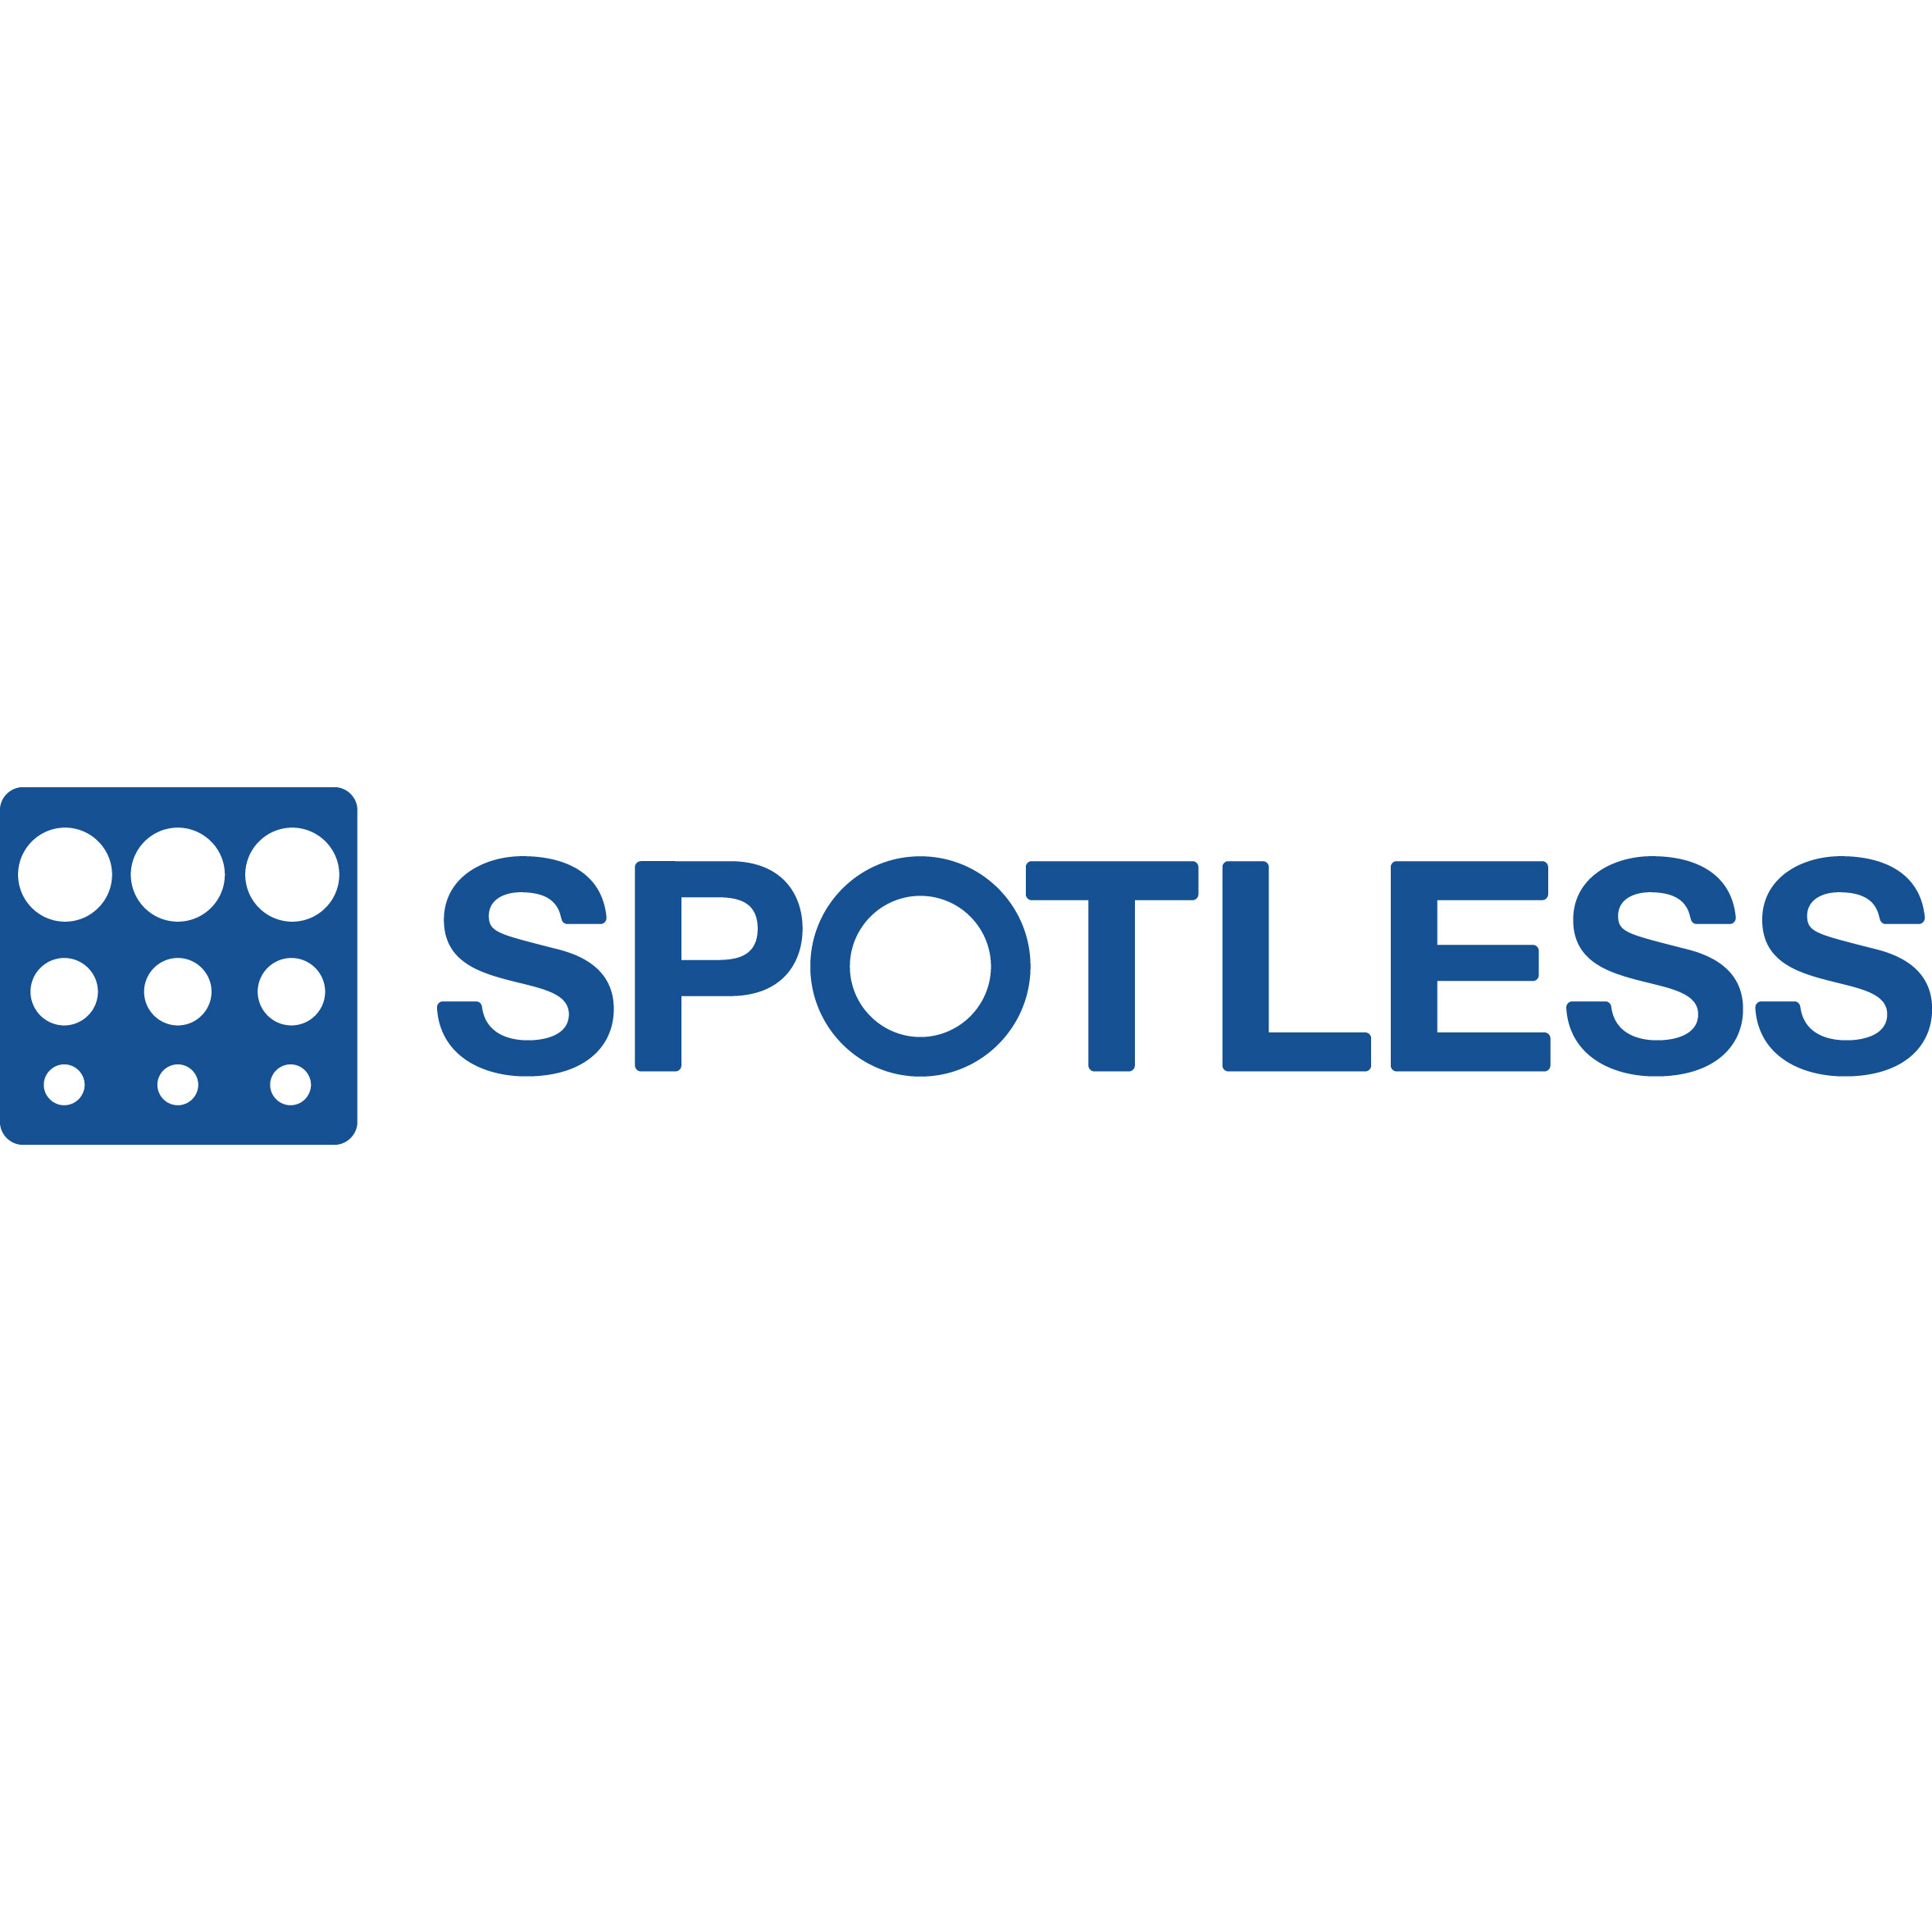 Spotless Catering, Spotless PNG - Free PNG